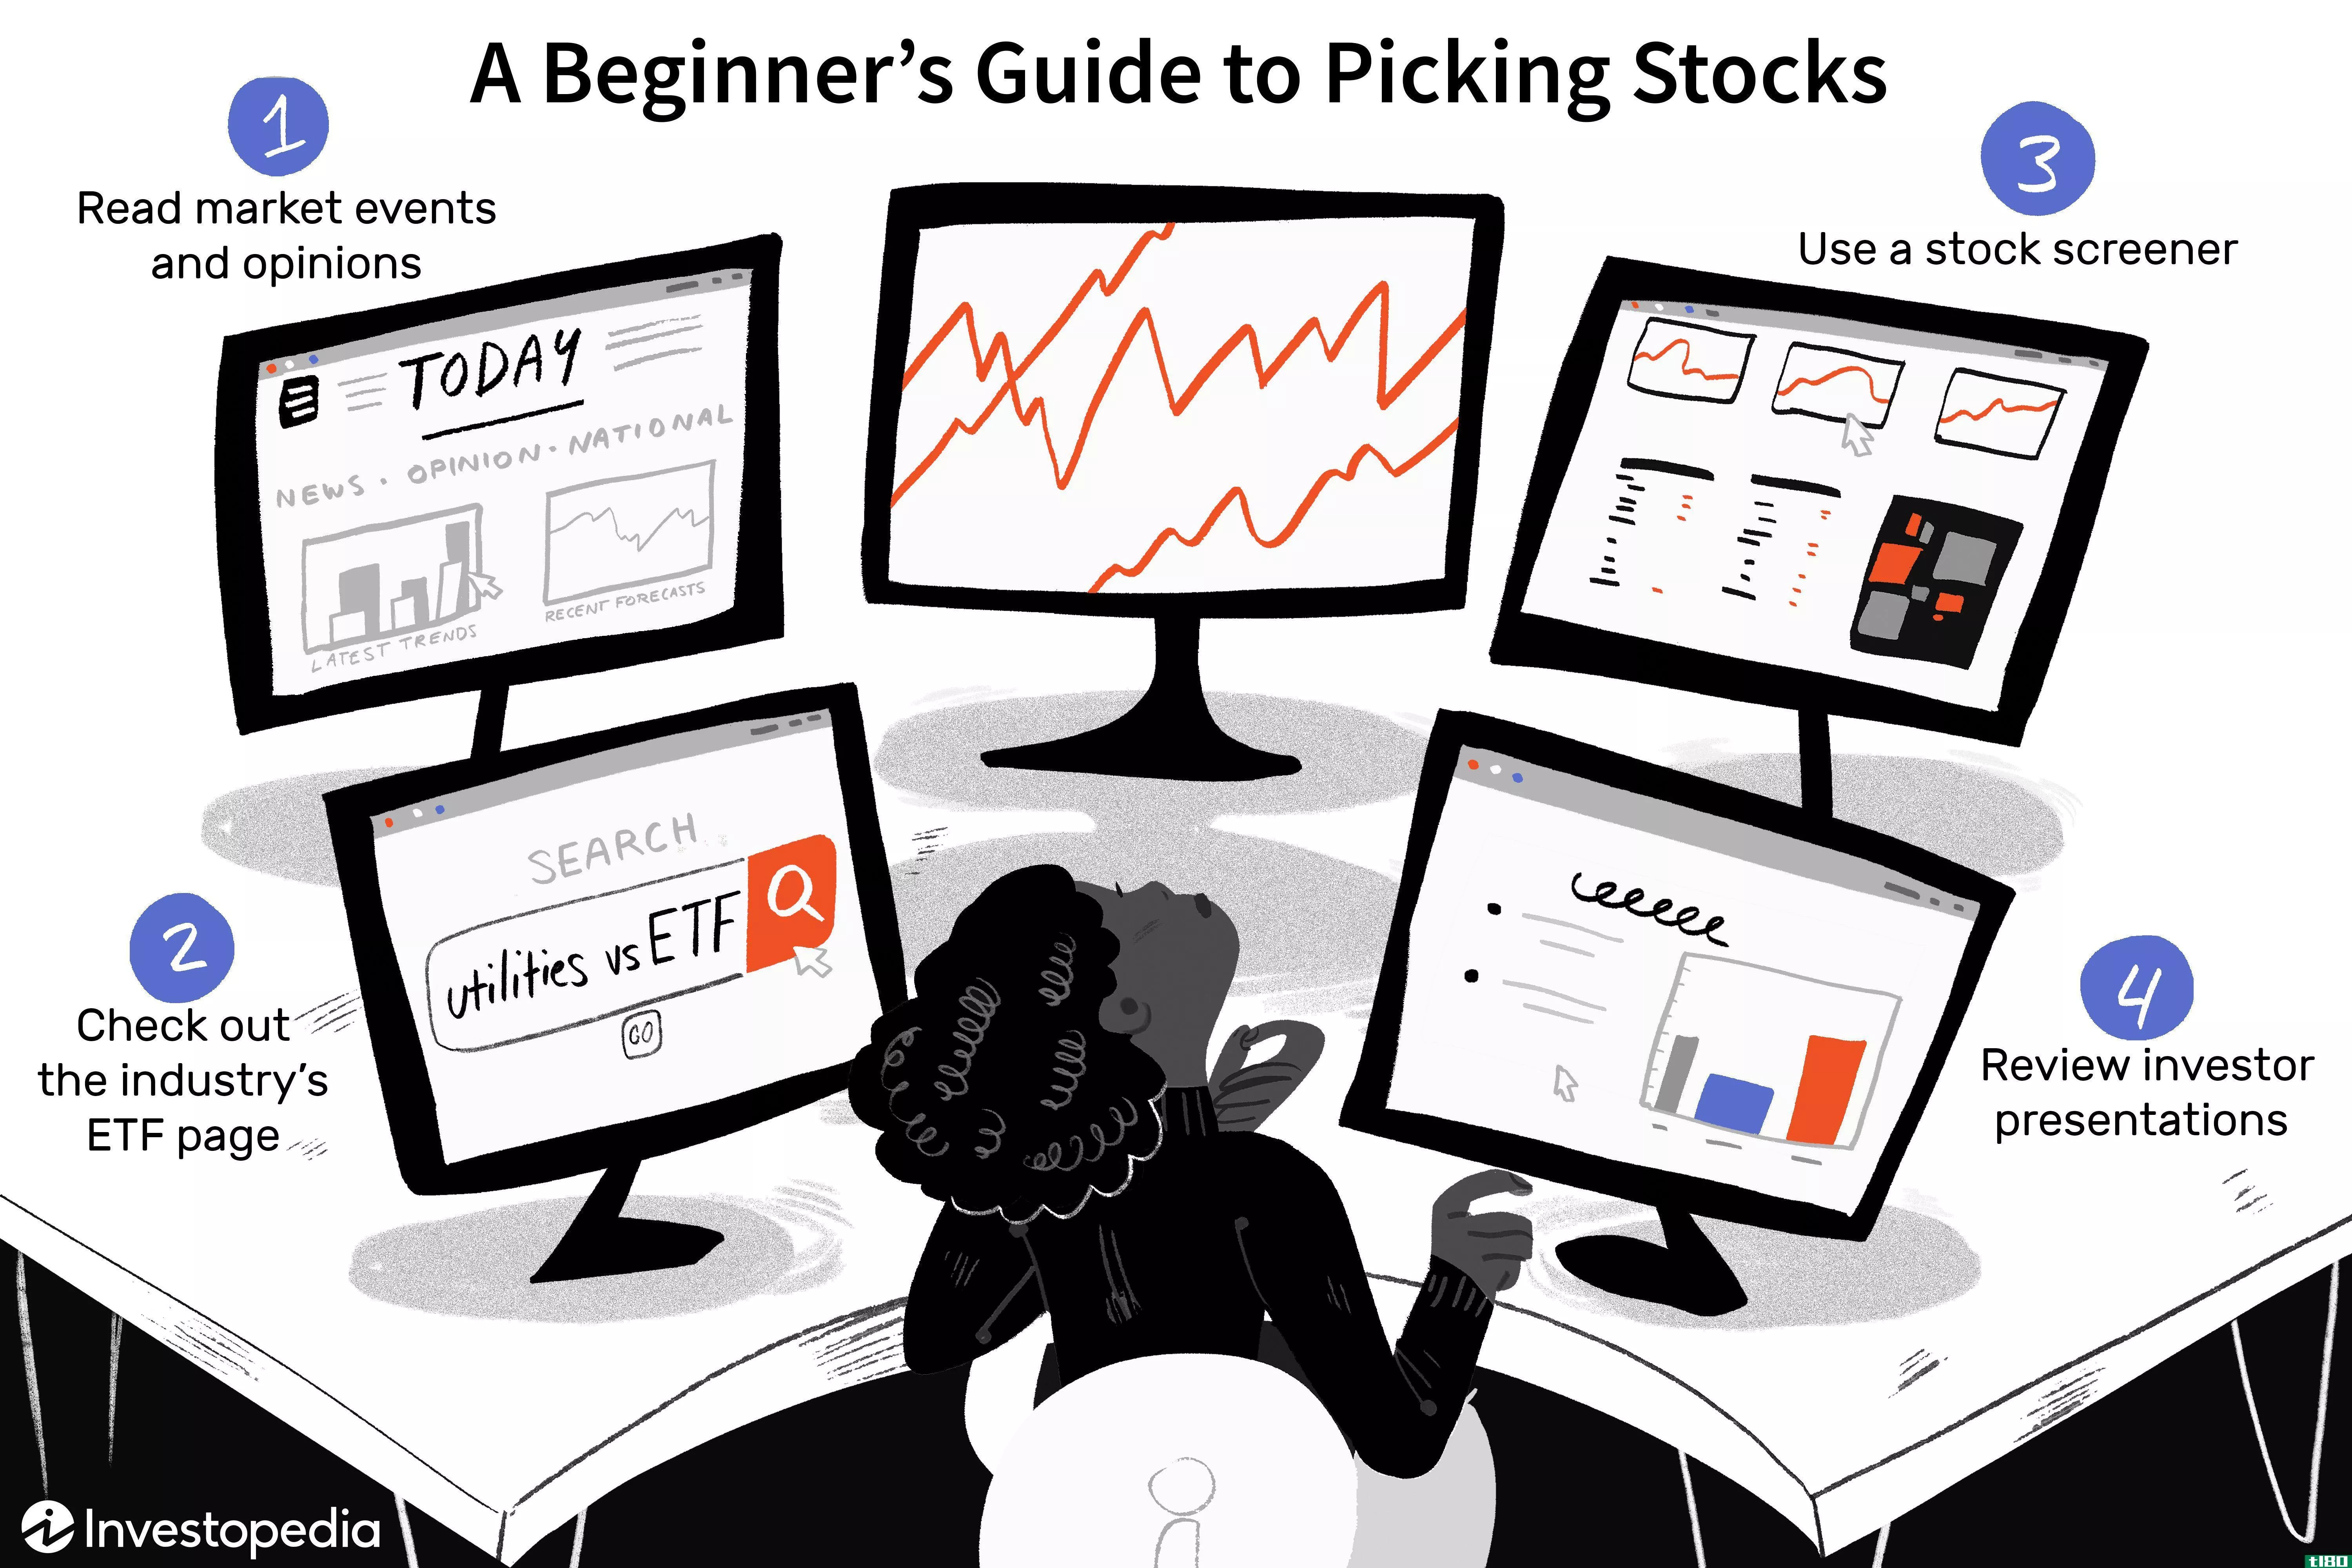 A Beginner's Guide to Picking Stocks